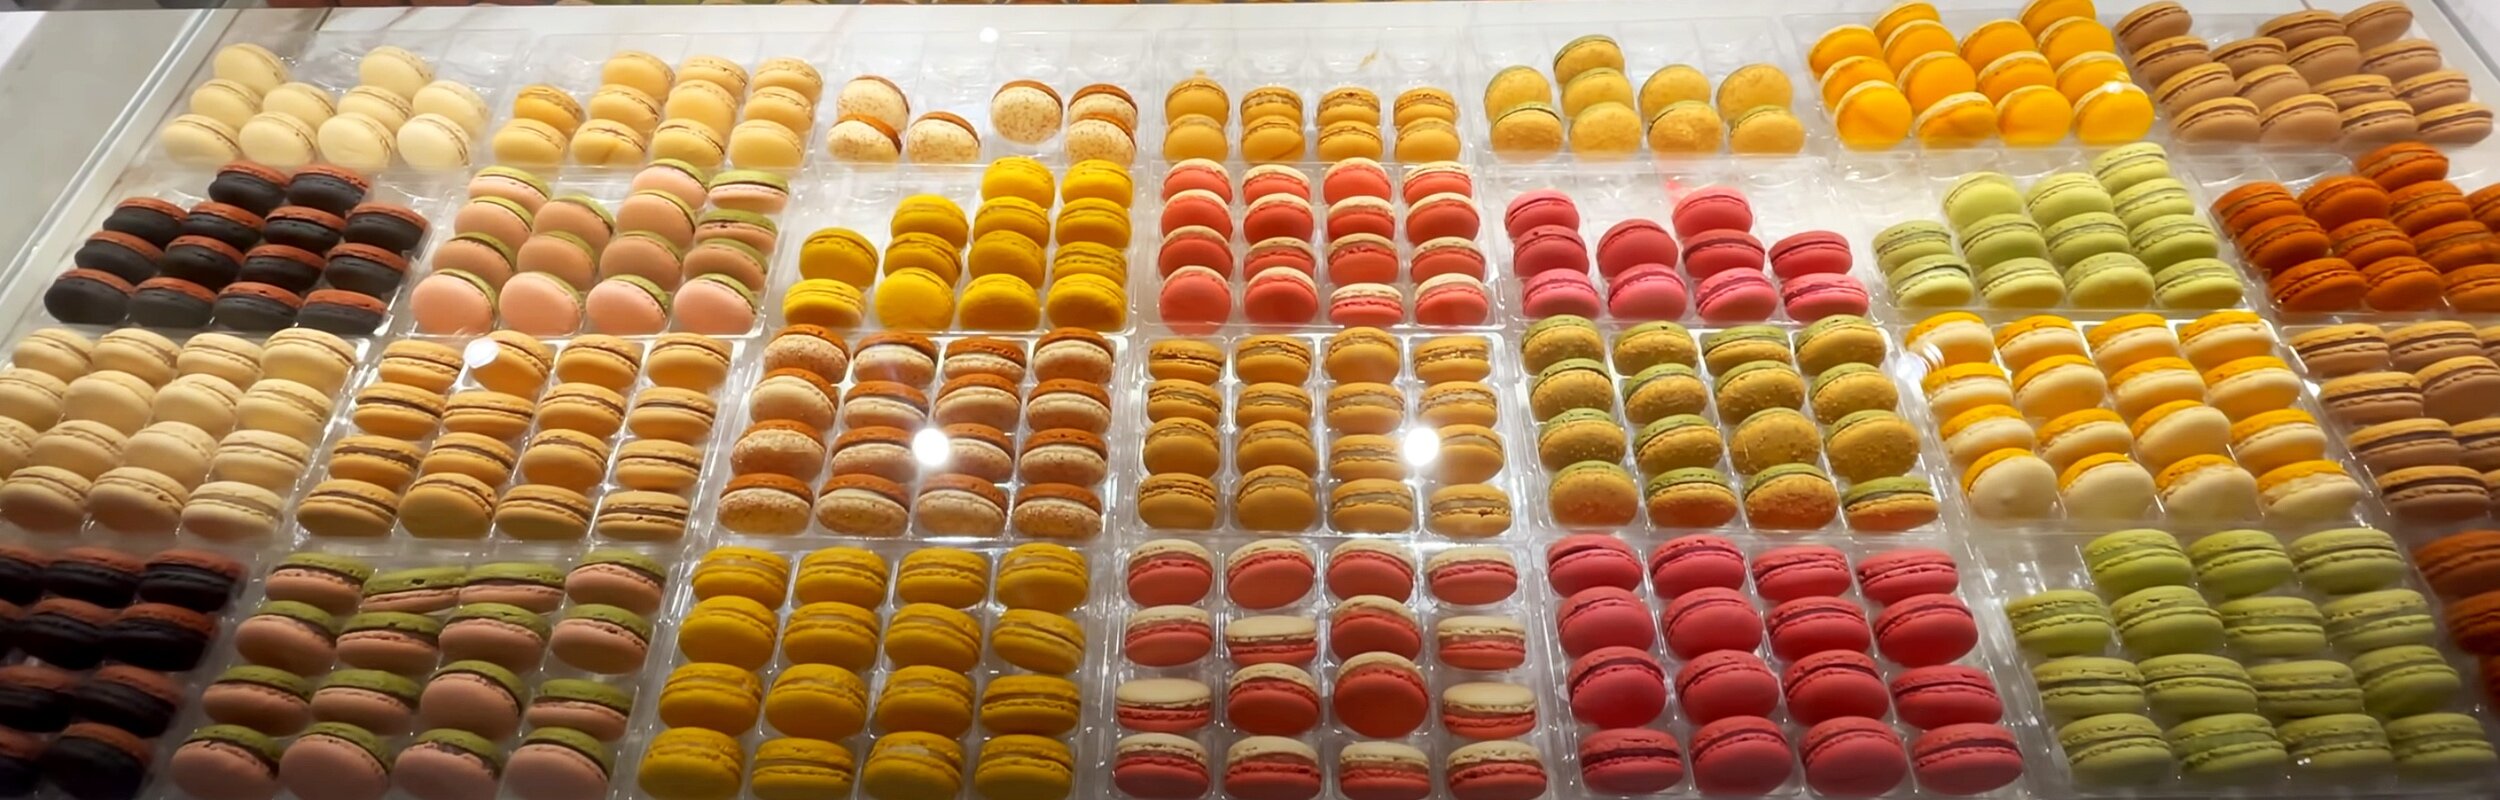  We can’t resist a macaron  